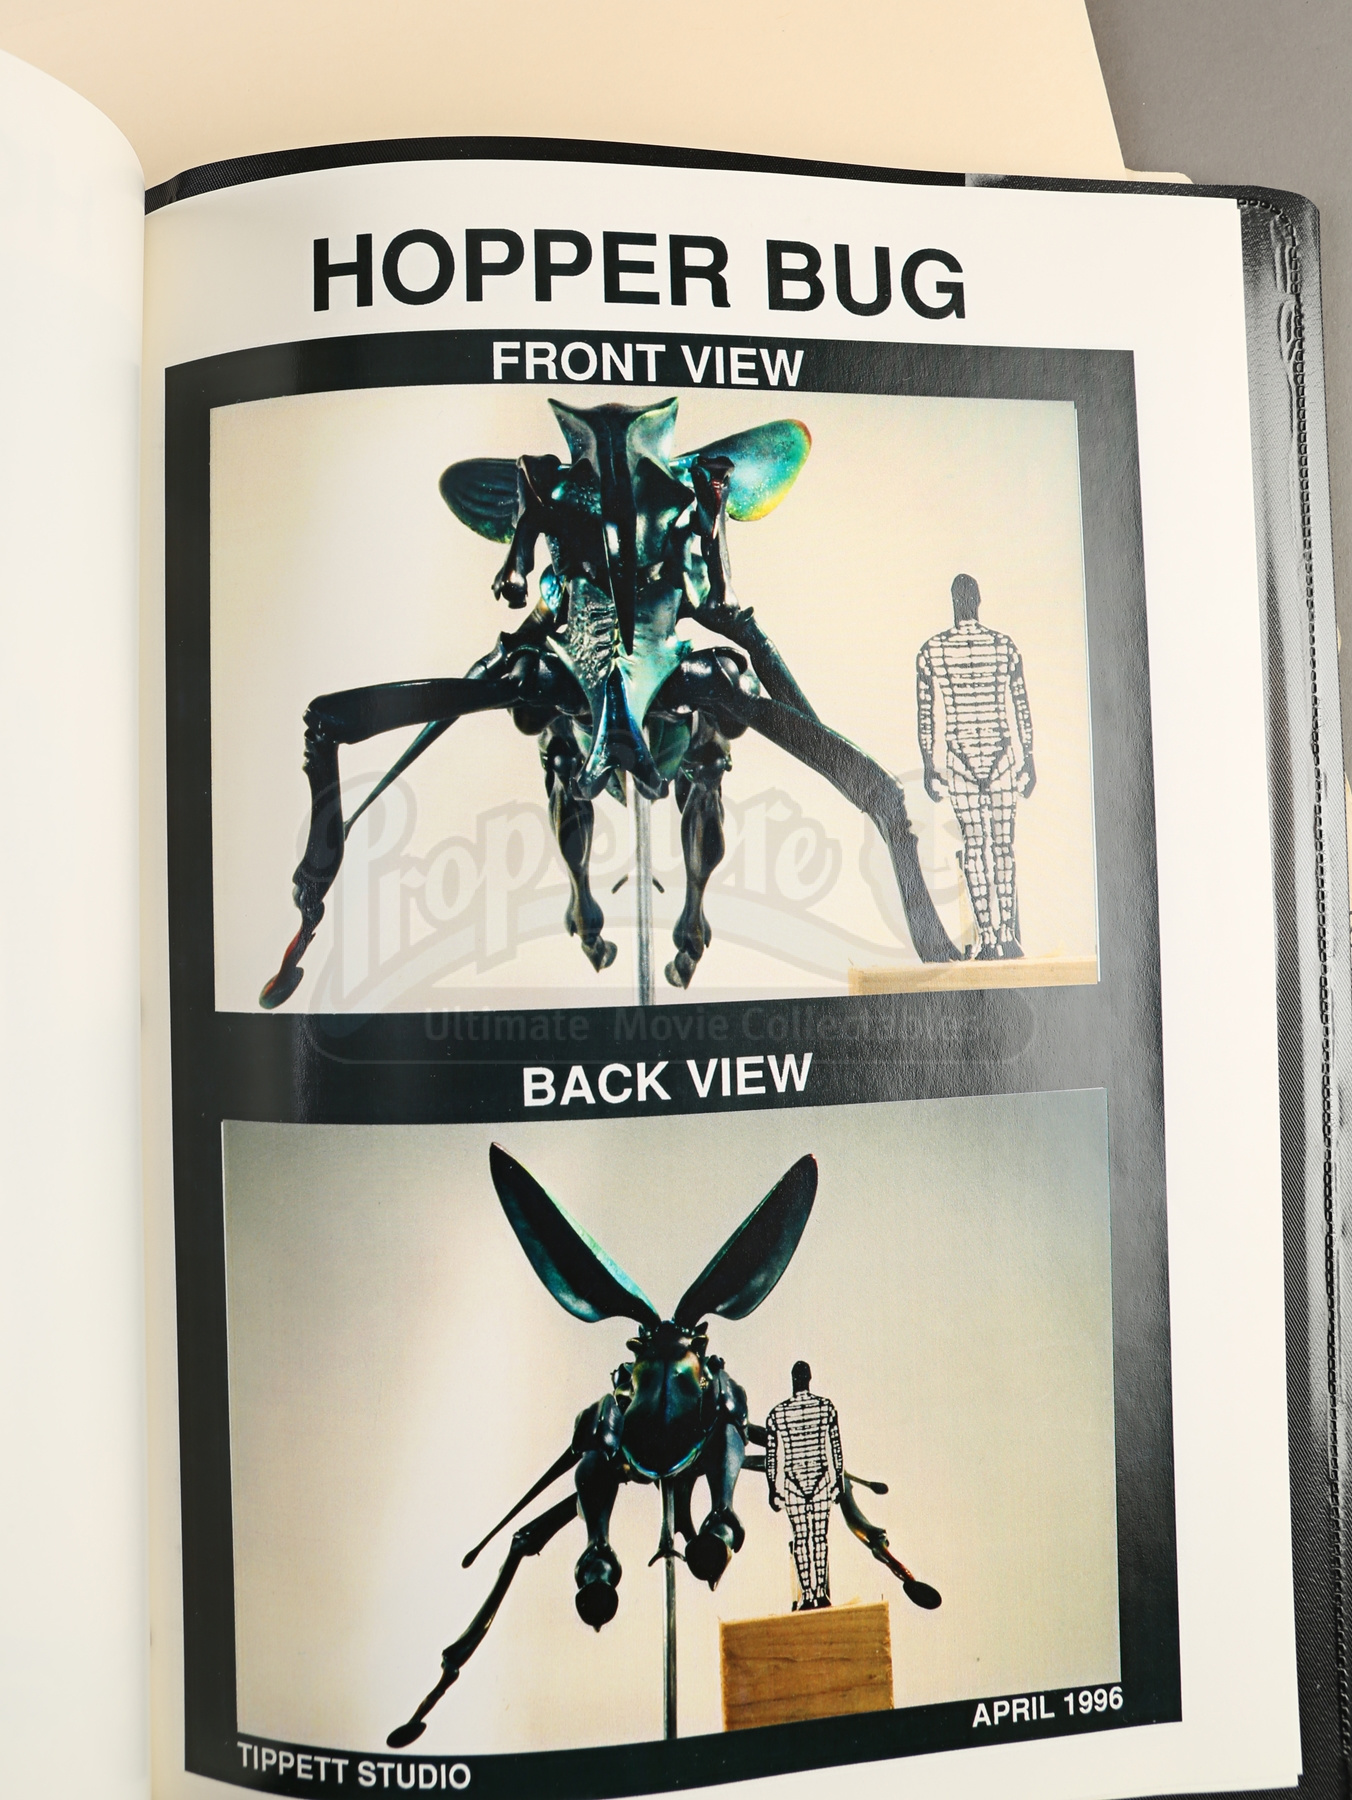 Starship Troopers Bugs Poster for Sale by EverettWiseb